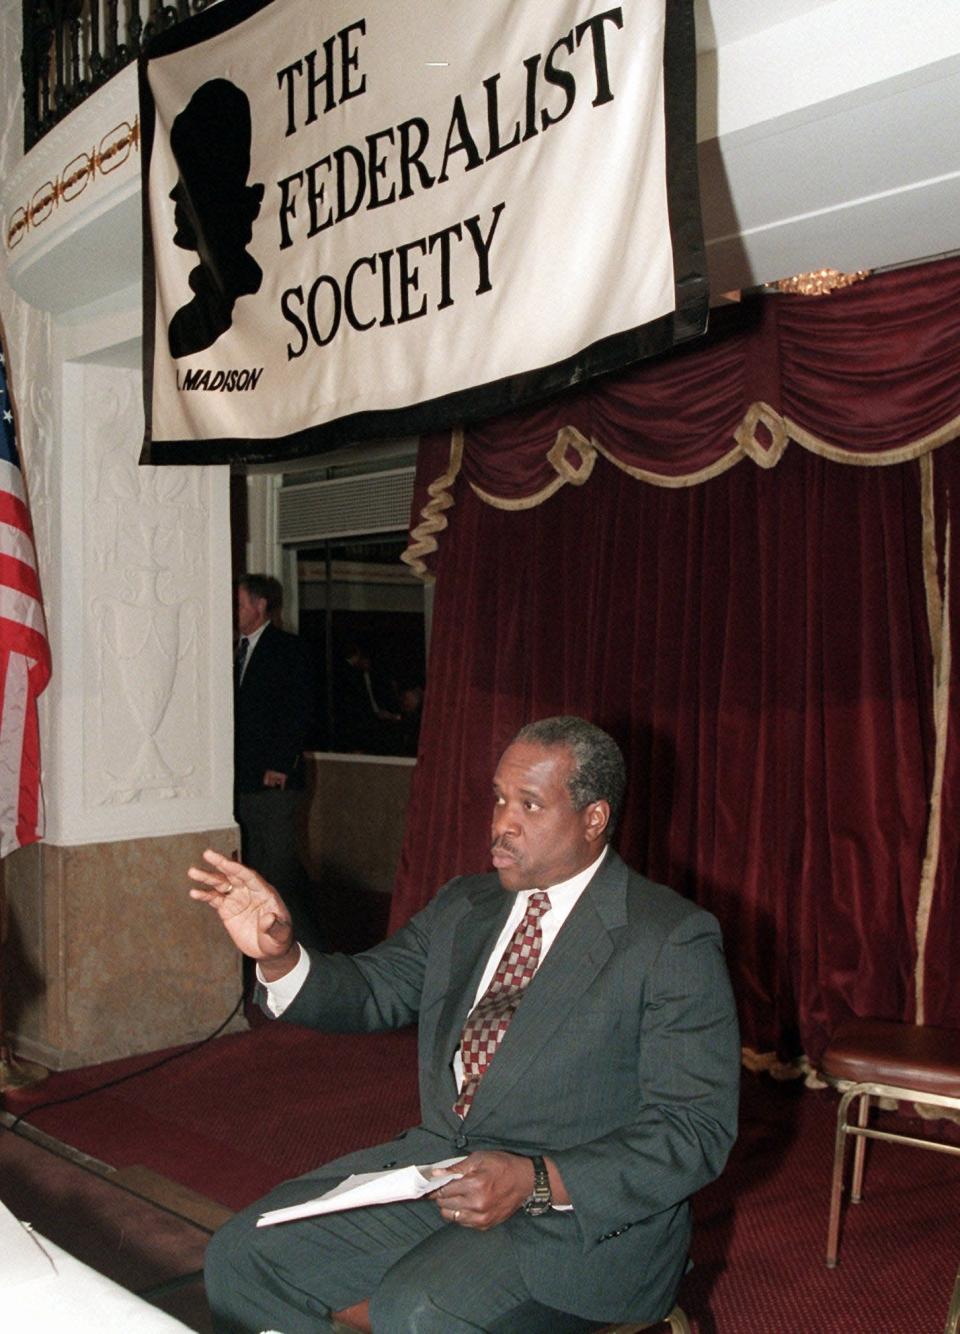 Supreme Court Justice Clarence Thomas addresses the Federalist Society in 1995 in Washington. Thomas spoke about how the concepts of victimhood and group rights have affected public debate and decision-making. Thomas has served on the court since 1991.